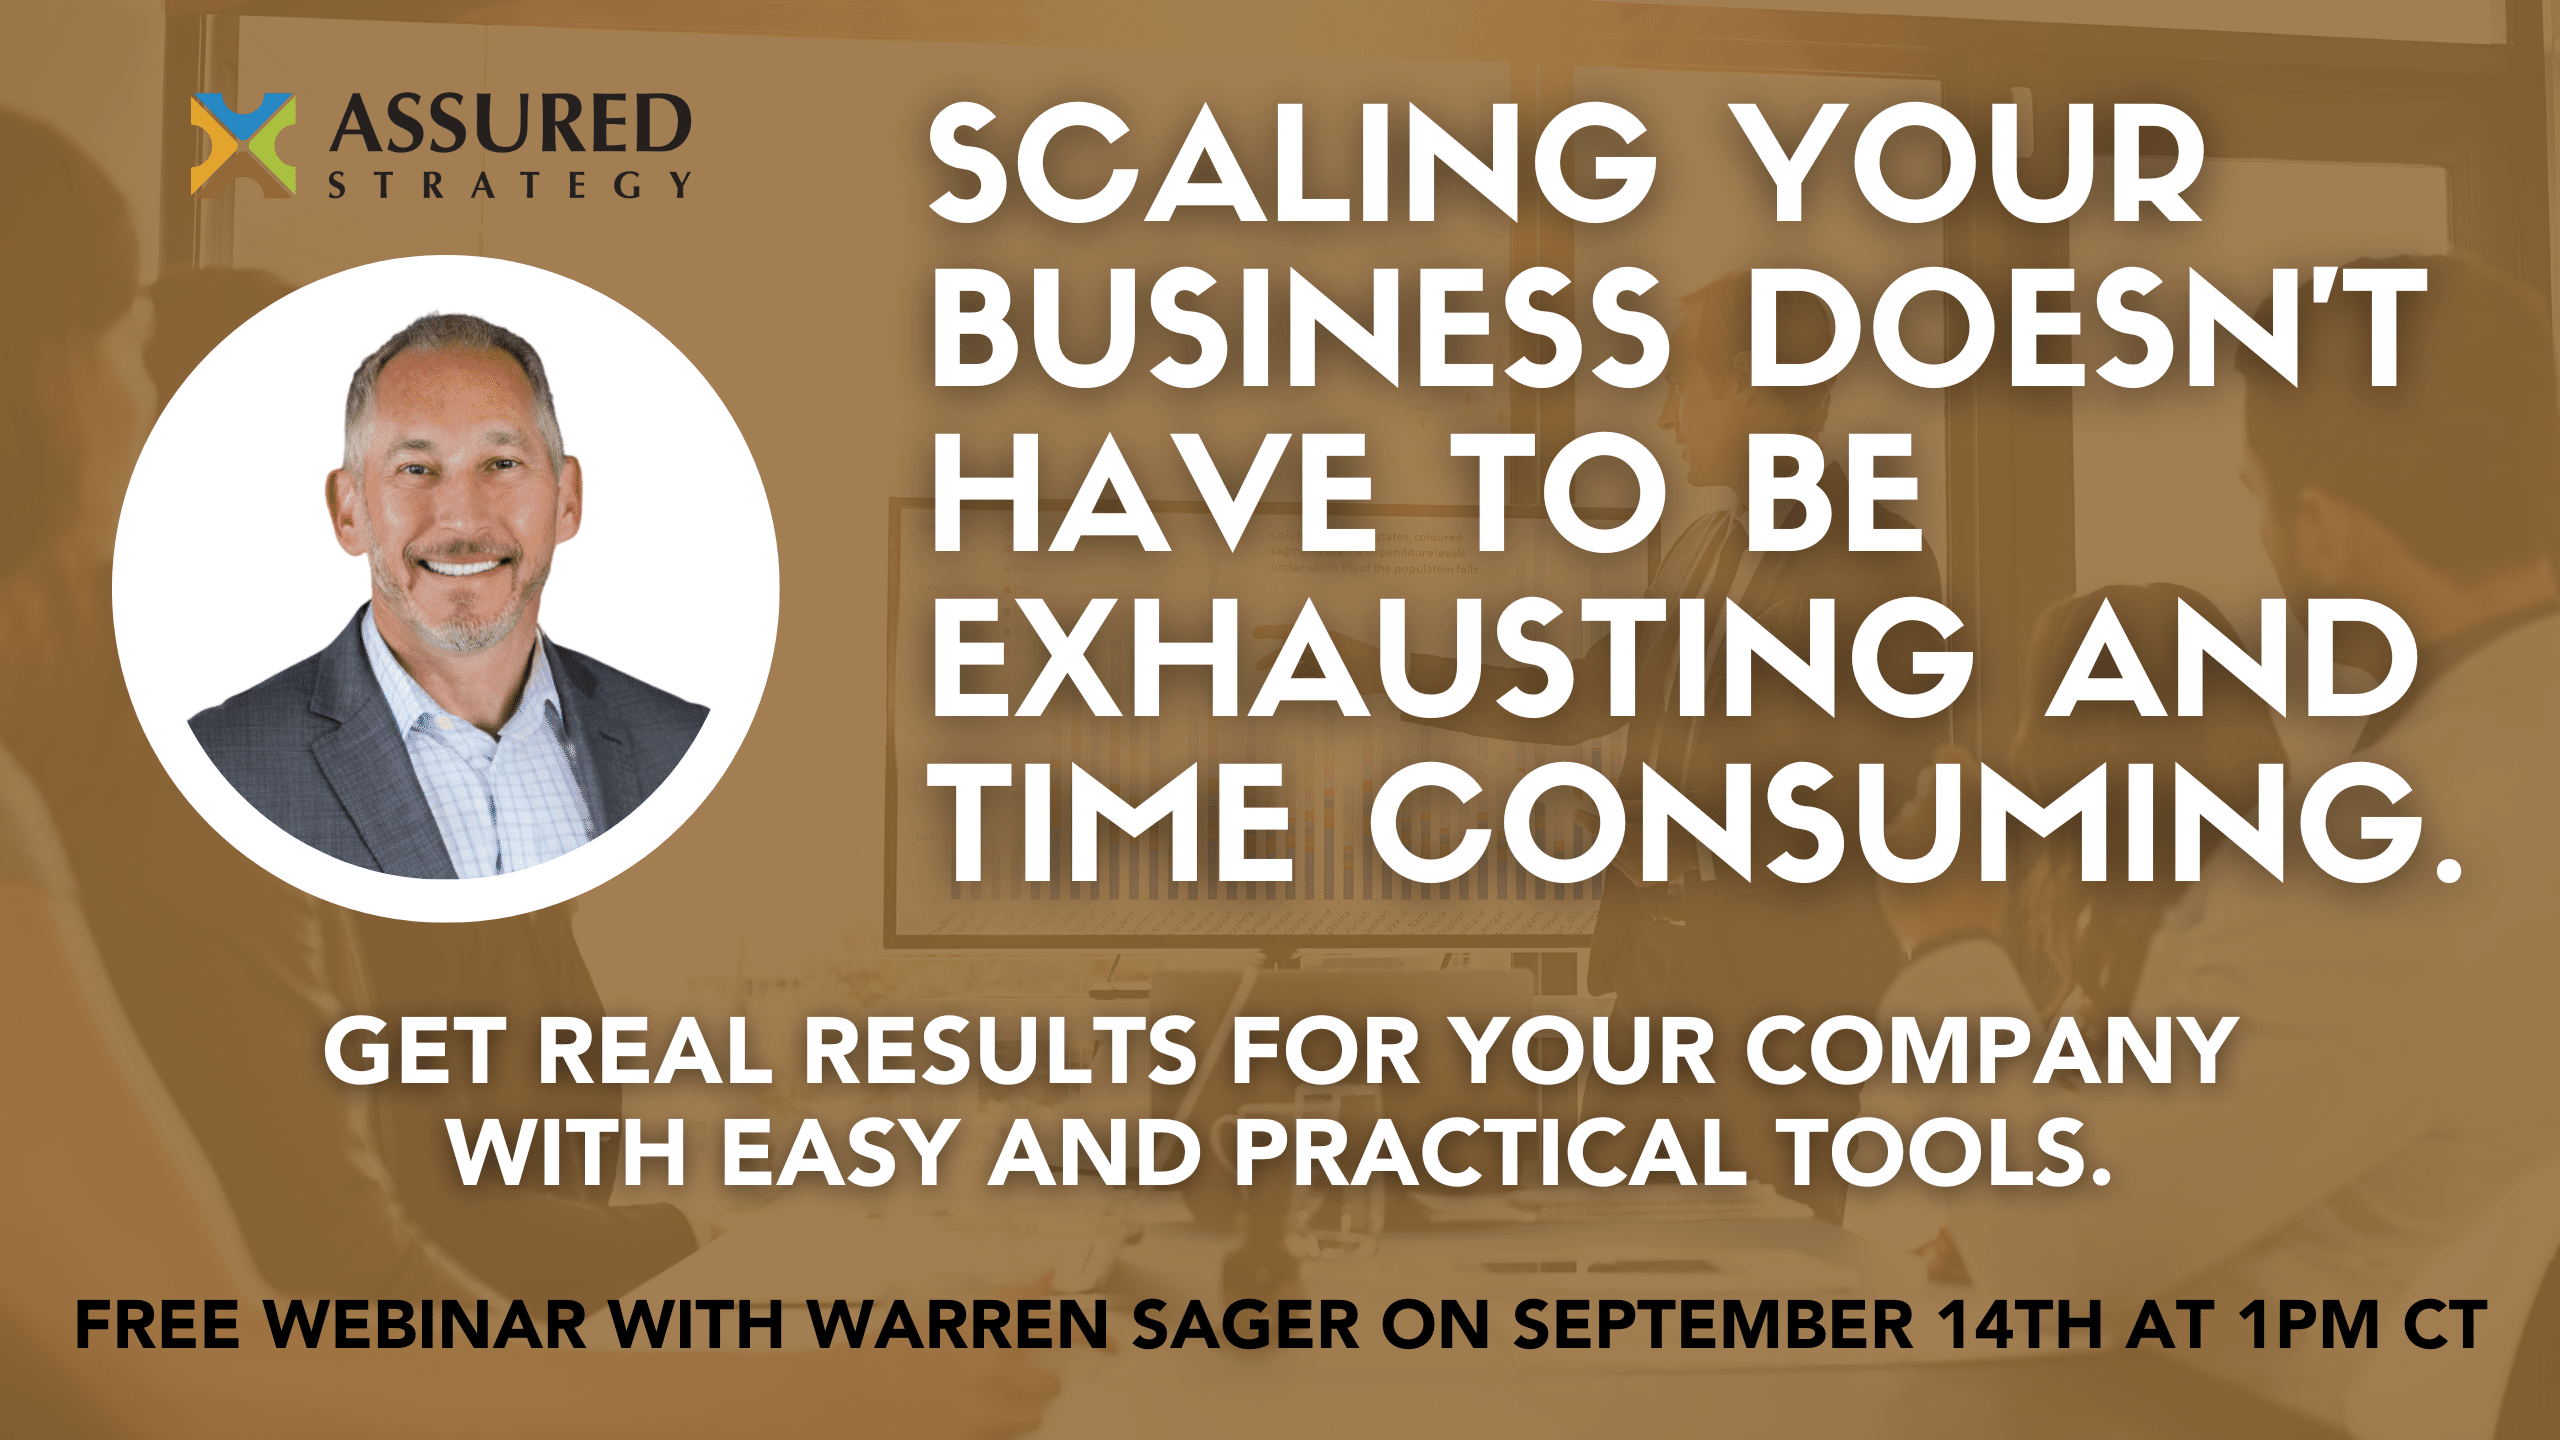 Free Webinar: How to Grow Your Business with 5 Proven Tools – September 14th from 1-2pm CT